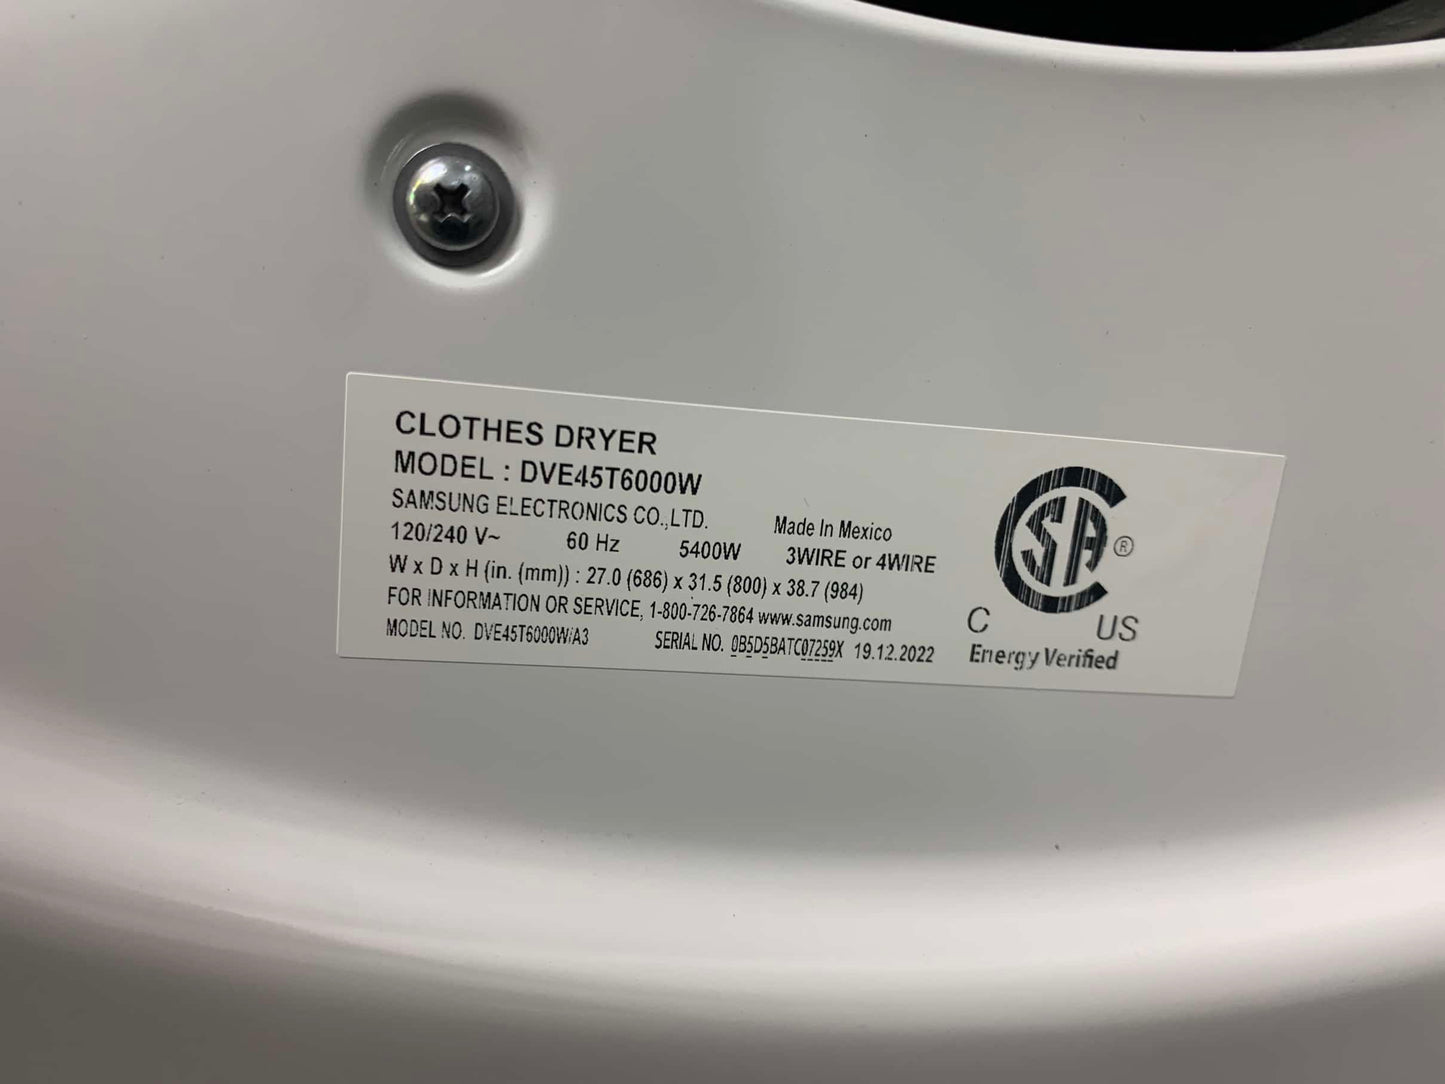 ★ Samsung Open Box 4.5 cu. ft. High-Efficiency Front Load Washer with Self-Clean+ in White & 7.5 cu. ft. Stackable Vented Electric Dryer with Sensor Dry in White 27 in WD641